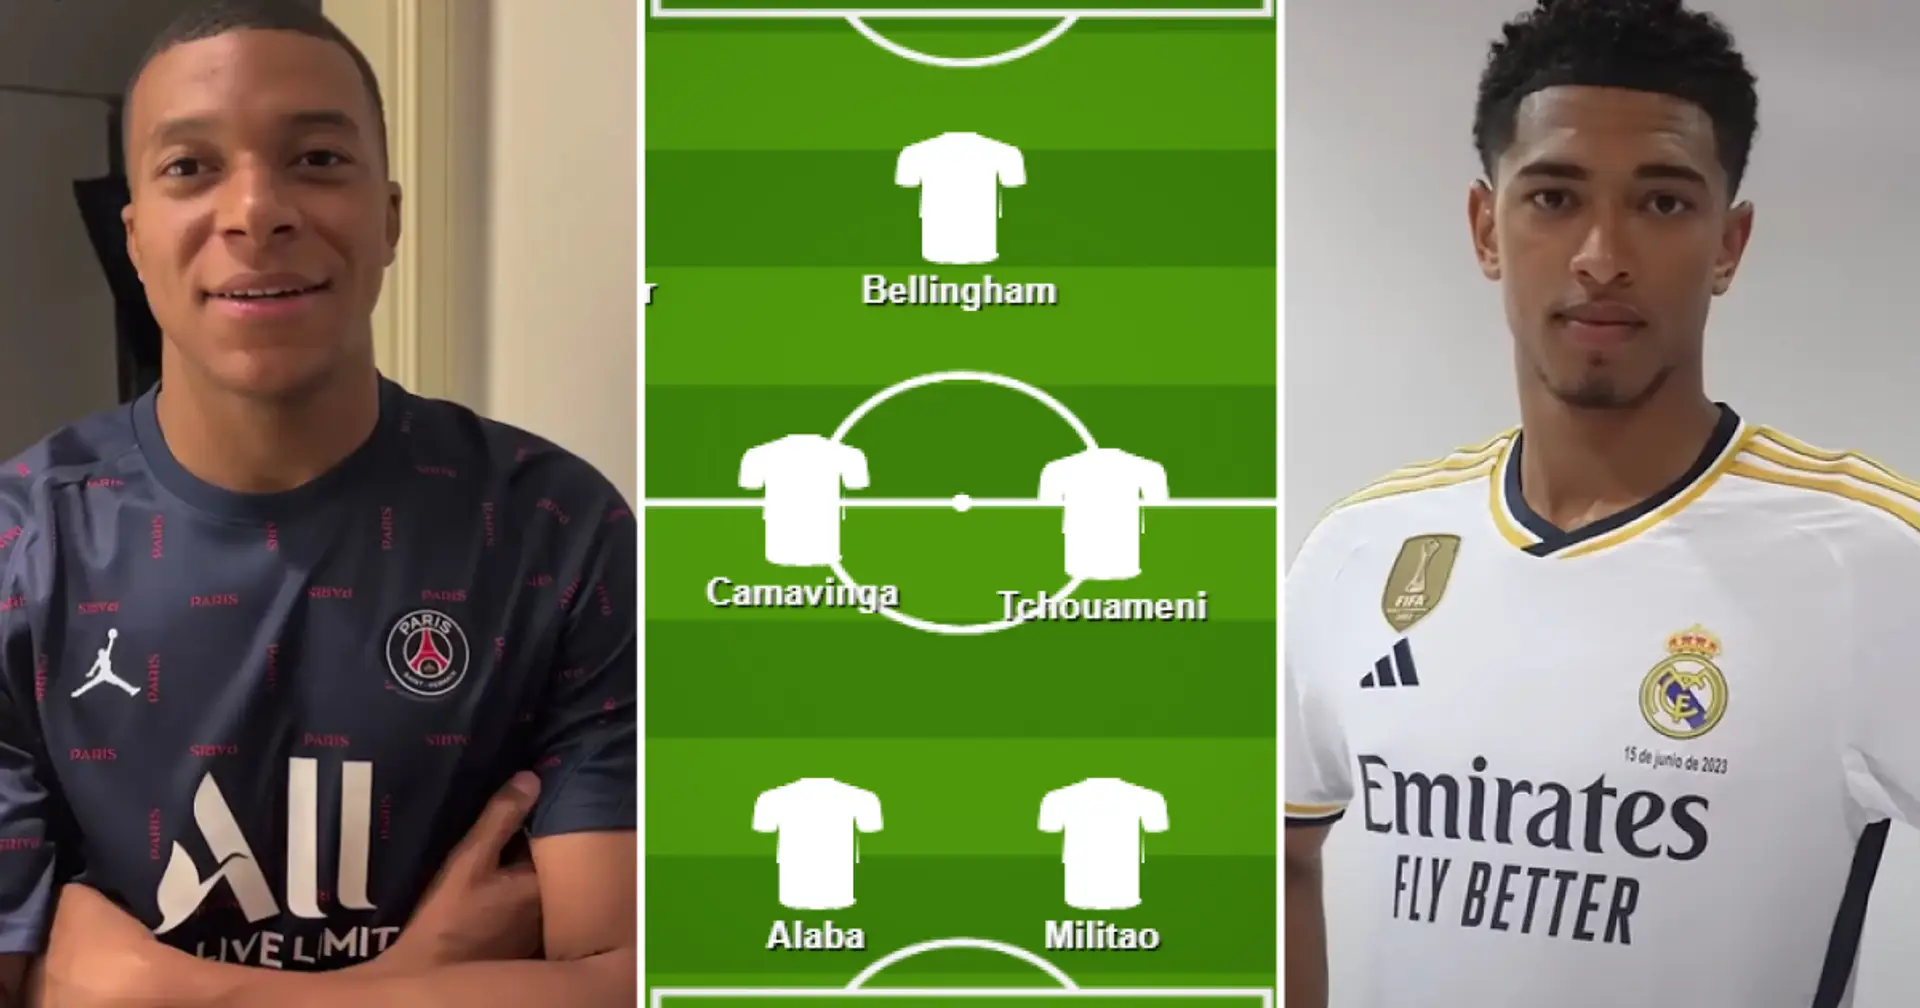 'I am really intrigued by it': Fan suggests 4-2-3-1 that perfectly fits Kylian Mbappe in